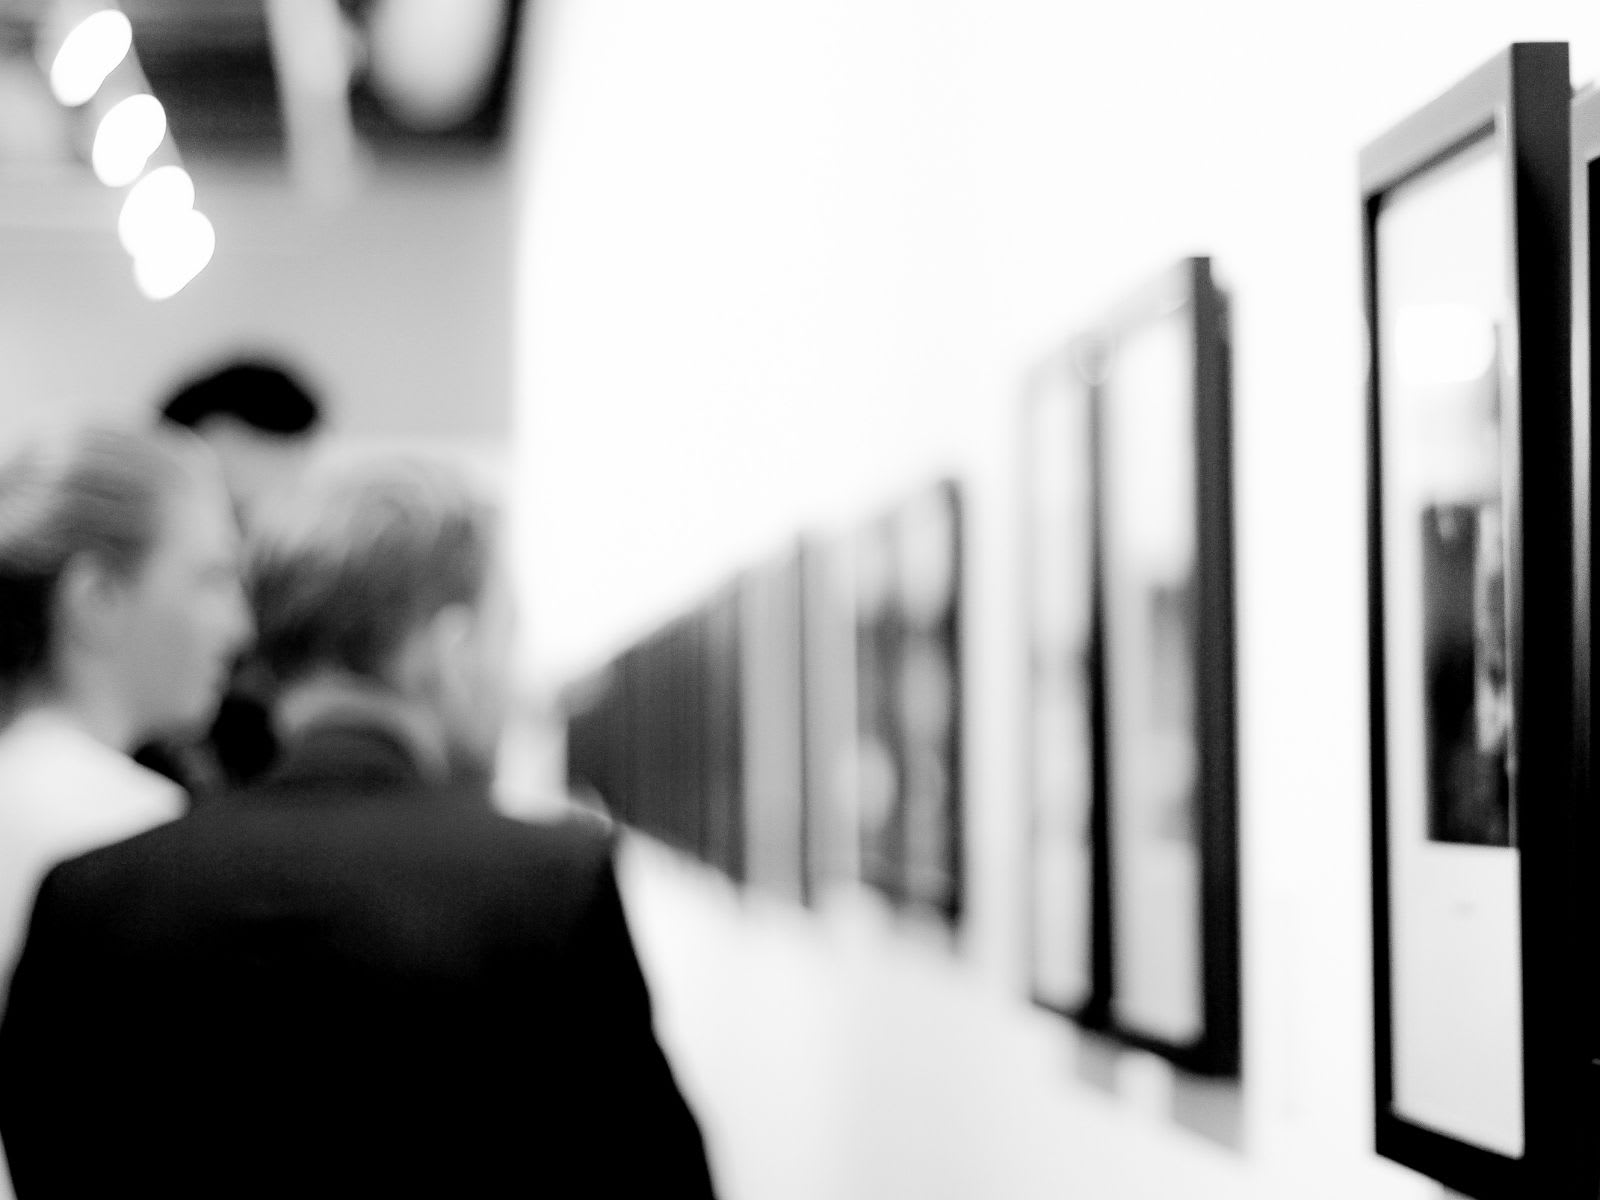 People at a gallery exhibition